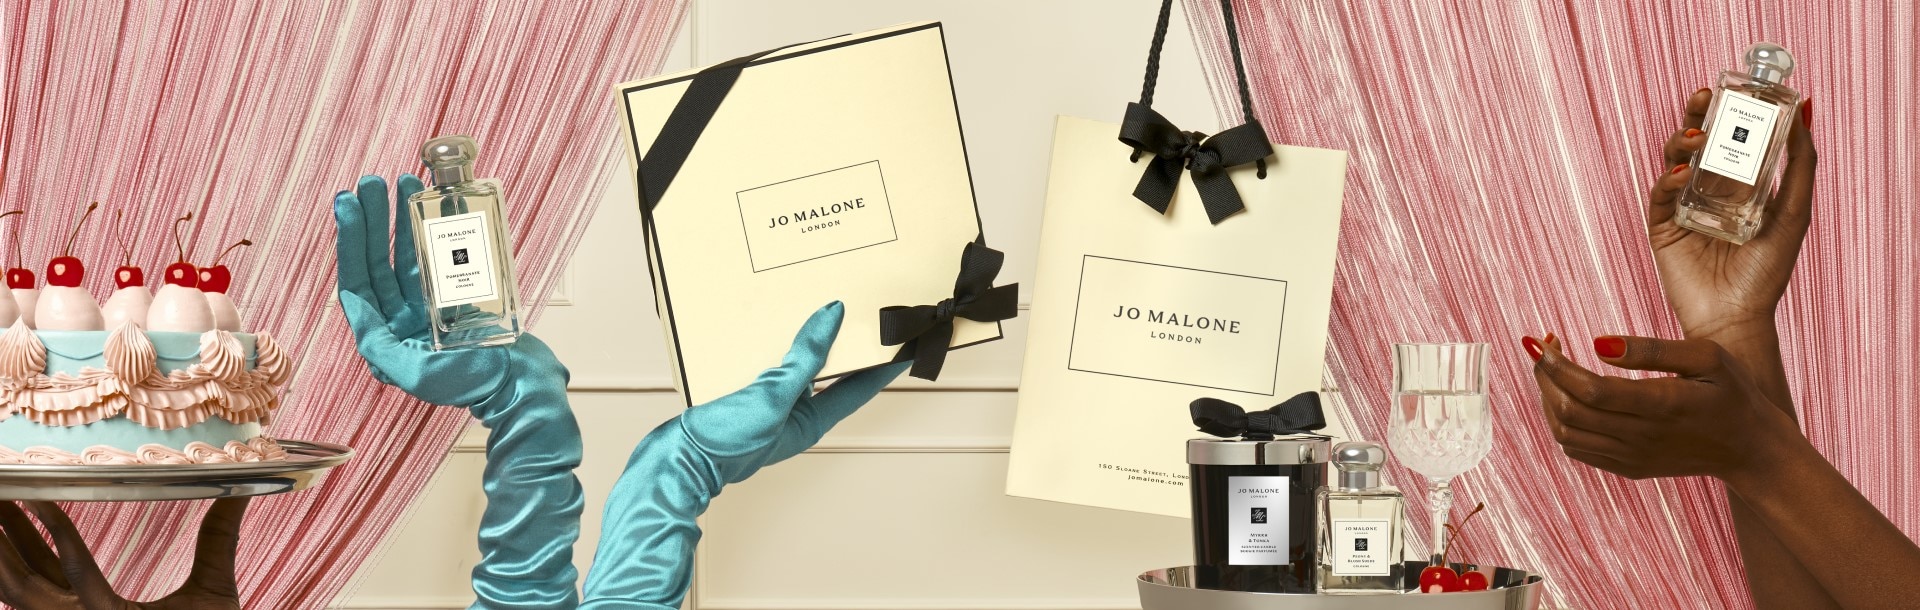 birthday cake & a pair of hands in satin green gloves holding jo malone gift bags, gift boxes, candle and diffuser